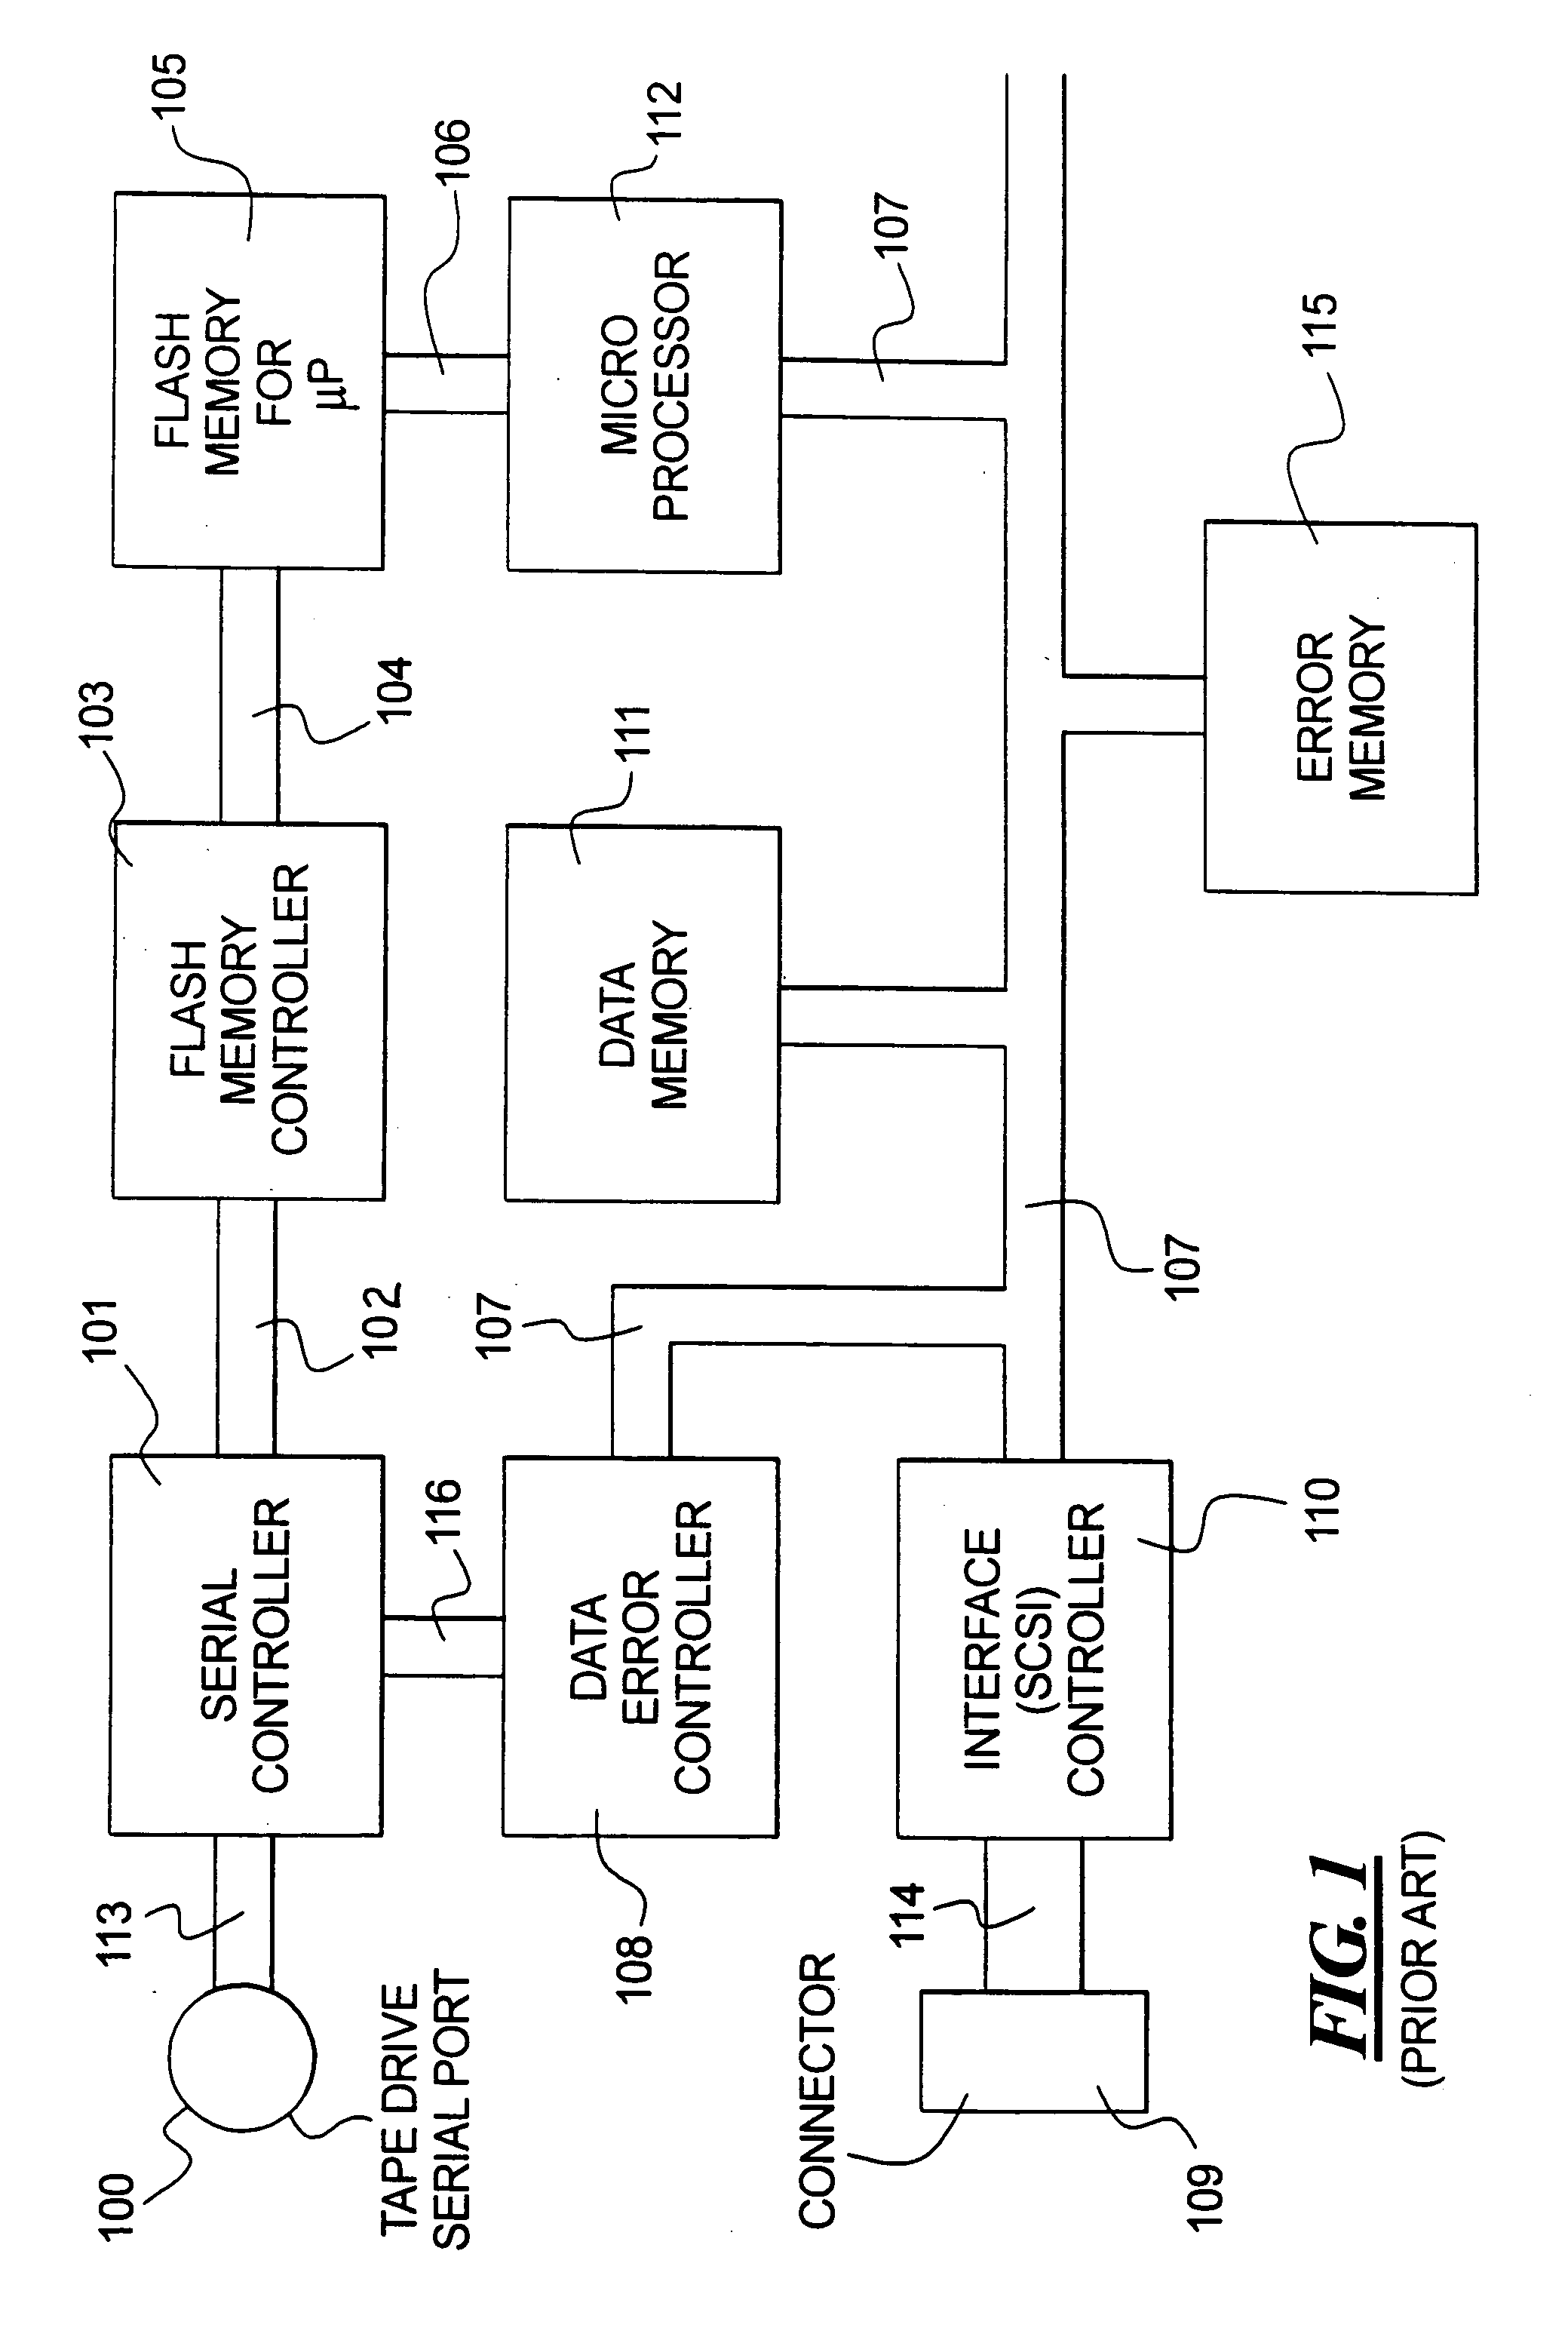 Method and system for communication between a tape drive and an external device